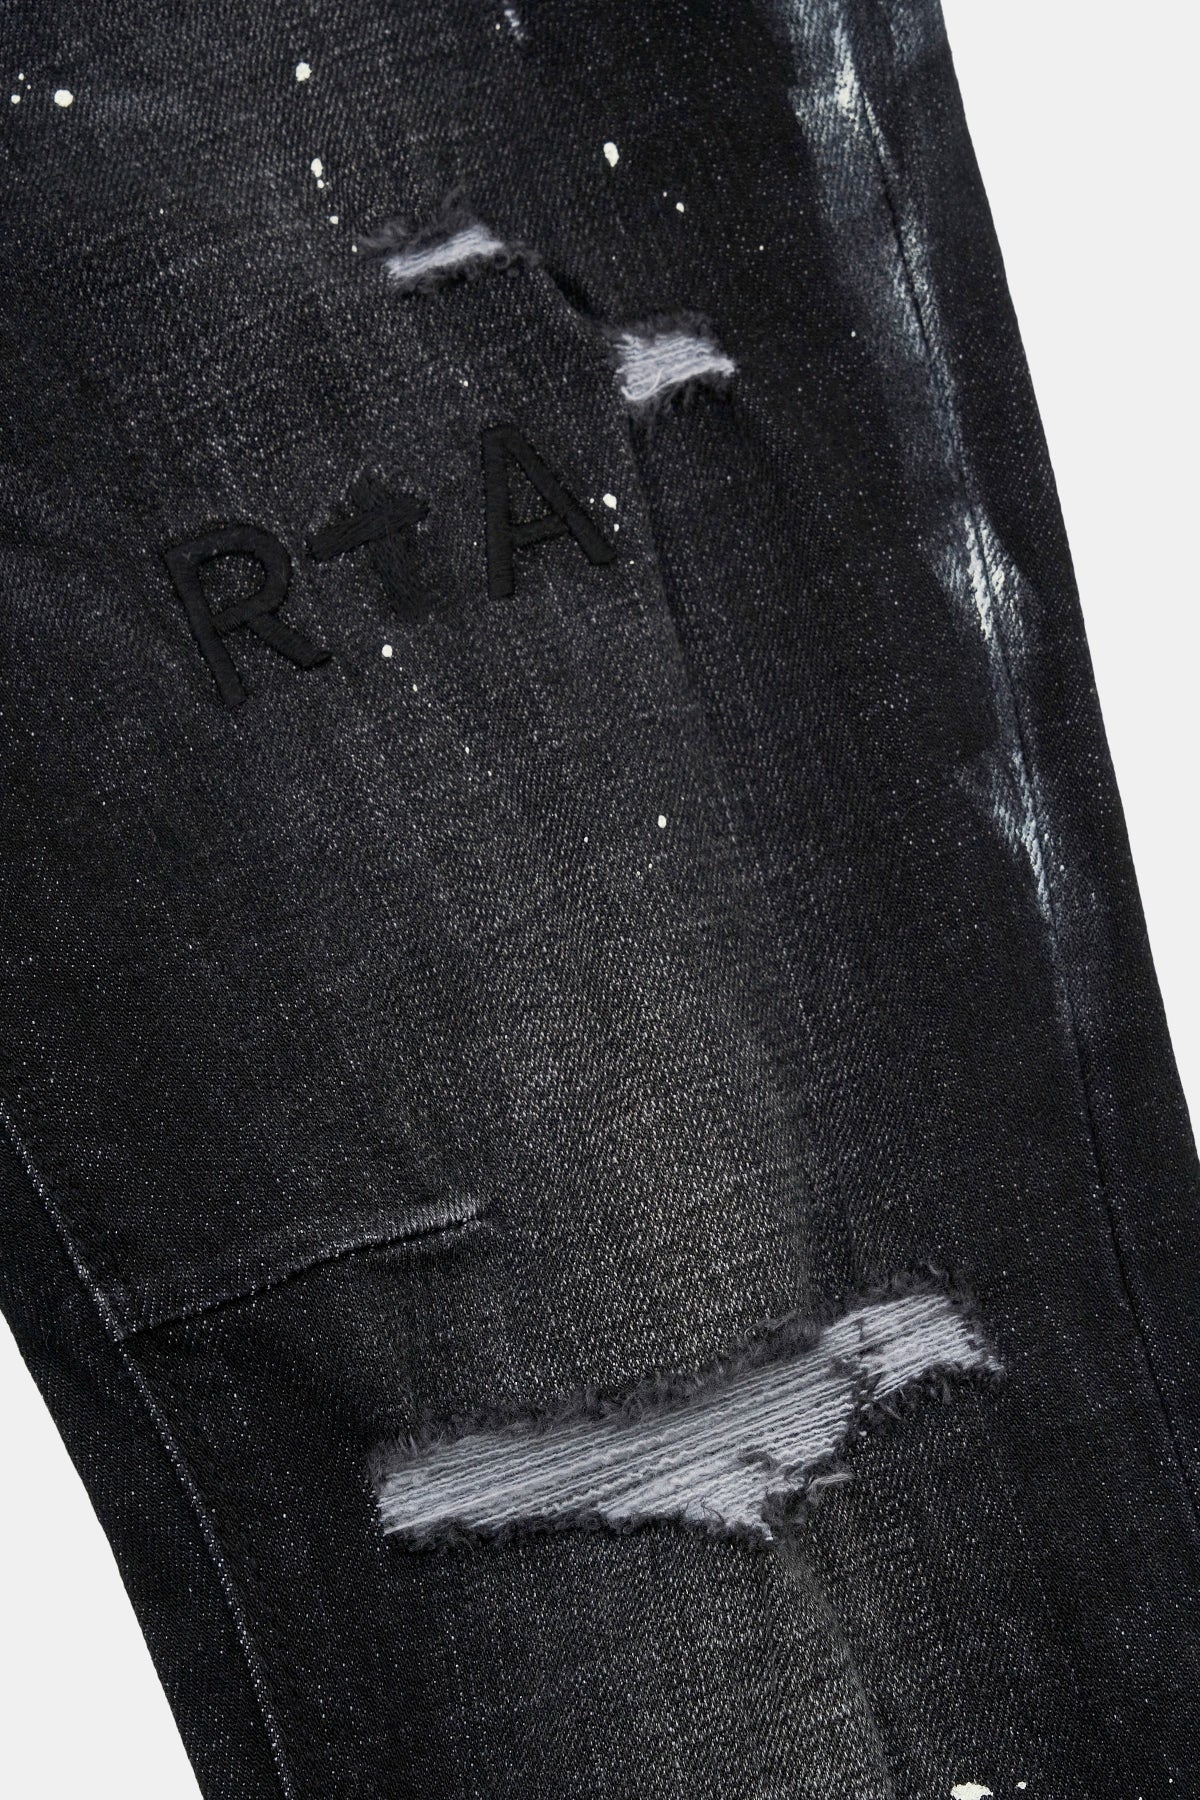 RTA DISTRESSED CHARCOAL PAINT JEANS